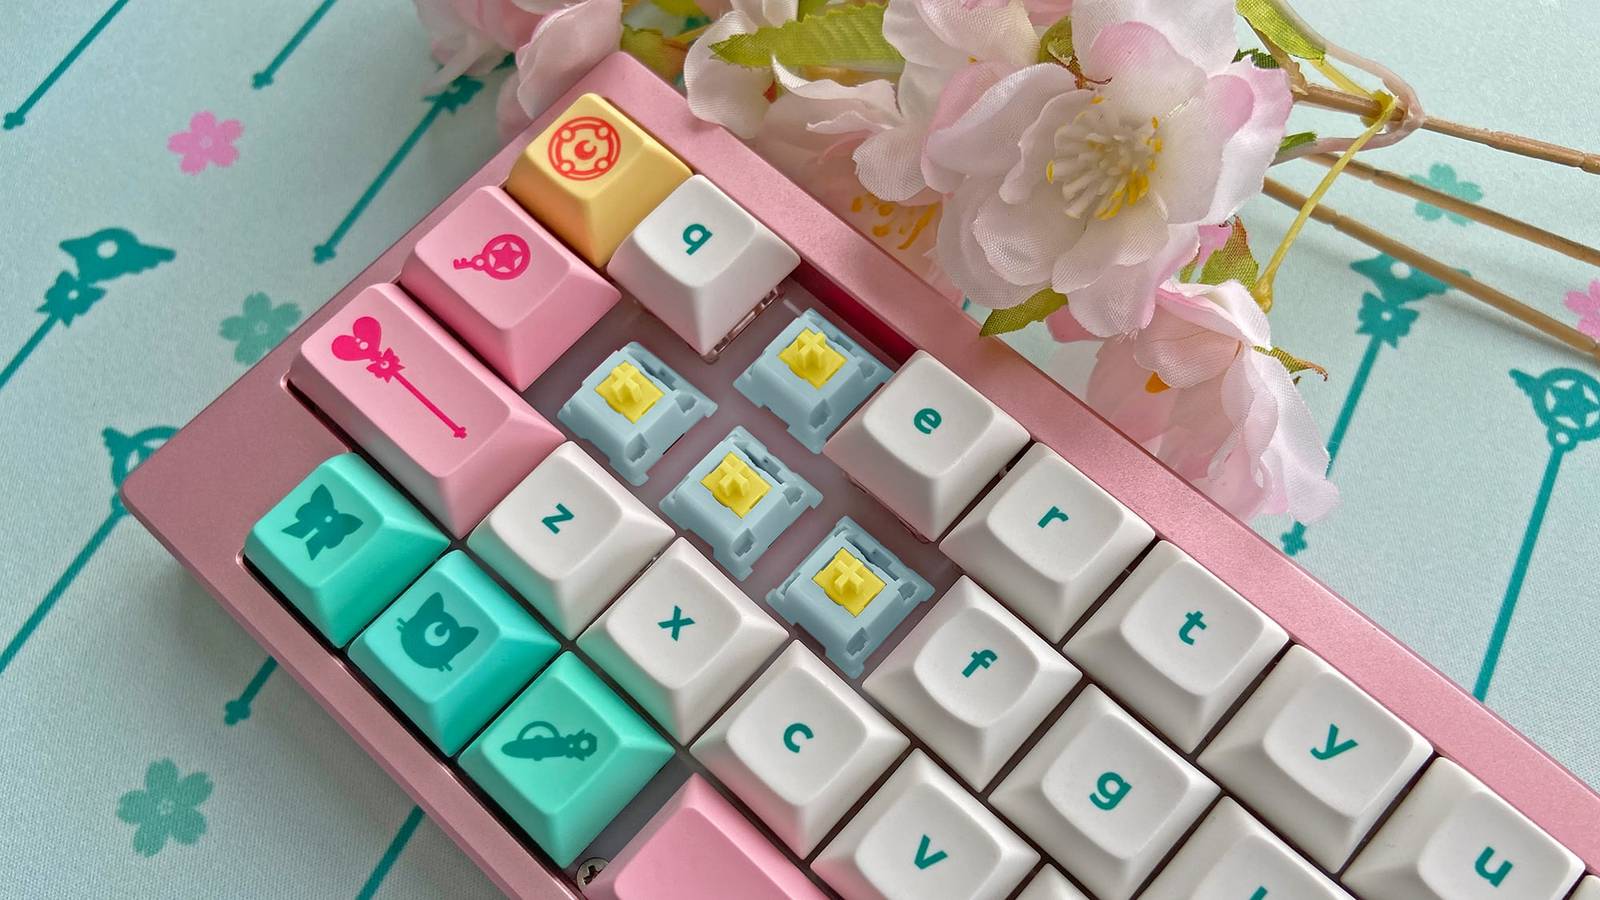 Photoshop of switches in a pink mechanical keyboard Dimple by LazyDesigners. featuring Magic Girl by Mintlodica matching Mechnical Keyboard Linear Switches featuring a 56g Long Spring 3 Stage Slow Spring configuration. Polycarbonate Top, Nylon Bottm, POM Stem and manufactured by JWK. The switch is light blue on the top and bottom with a pastel yellow stem.